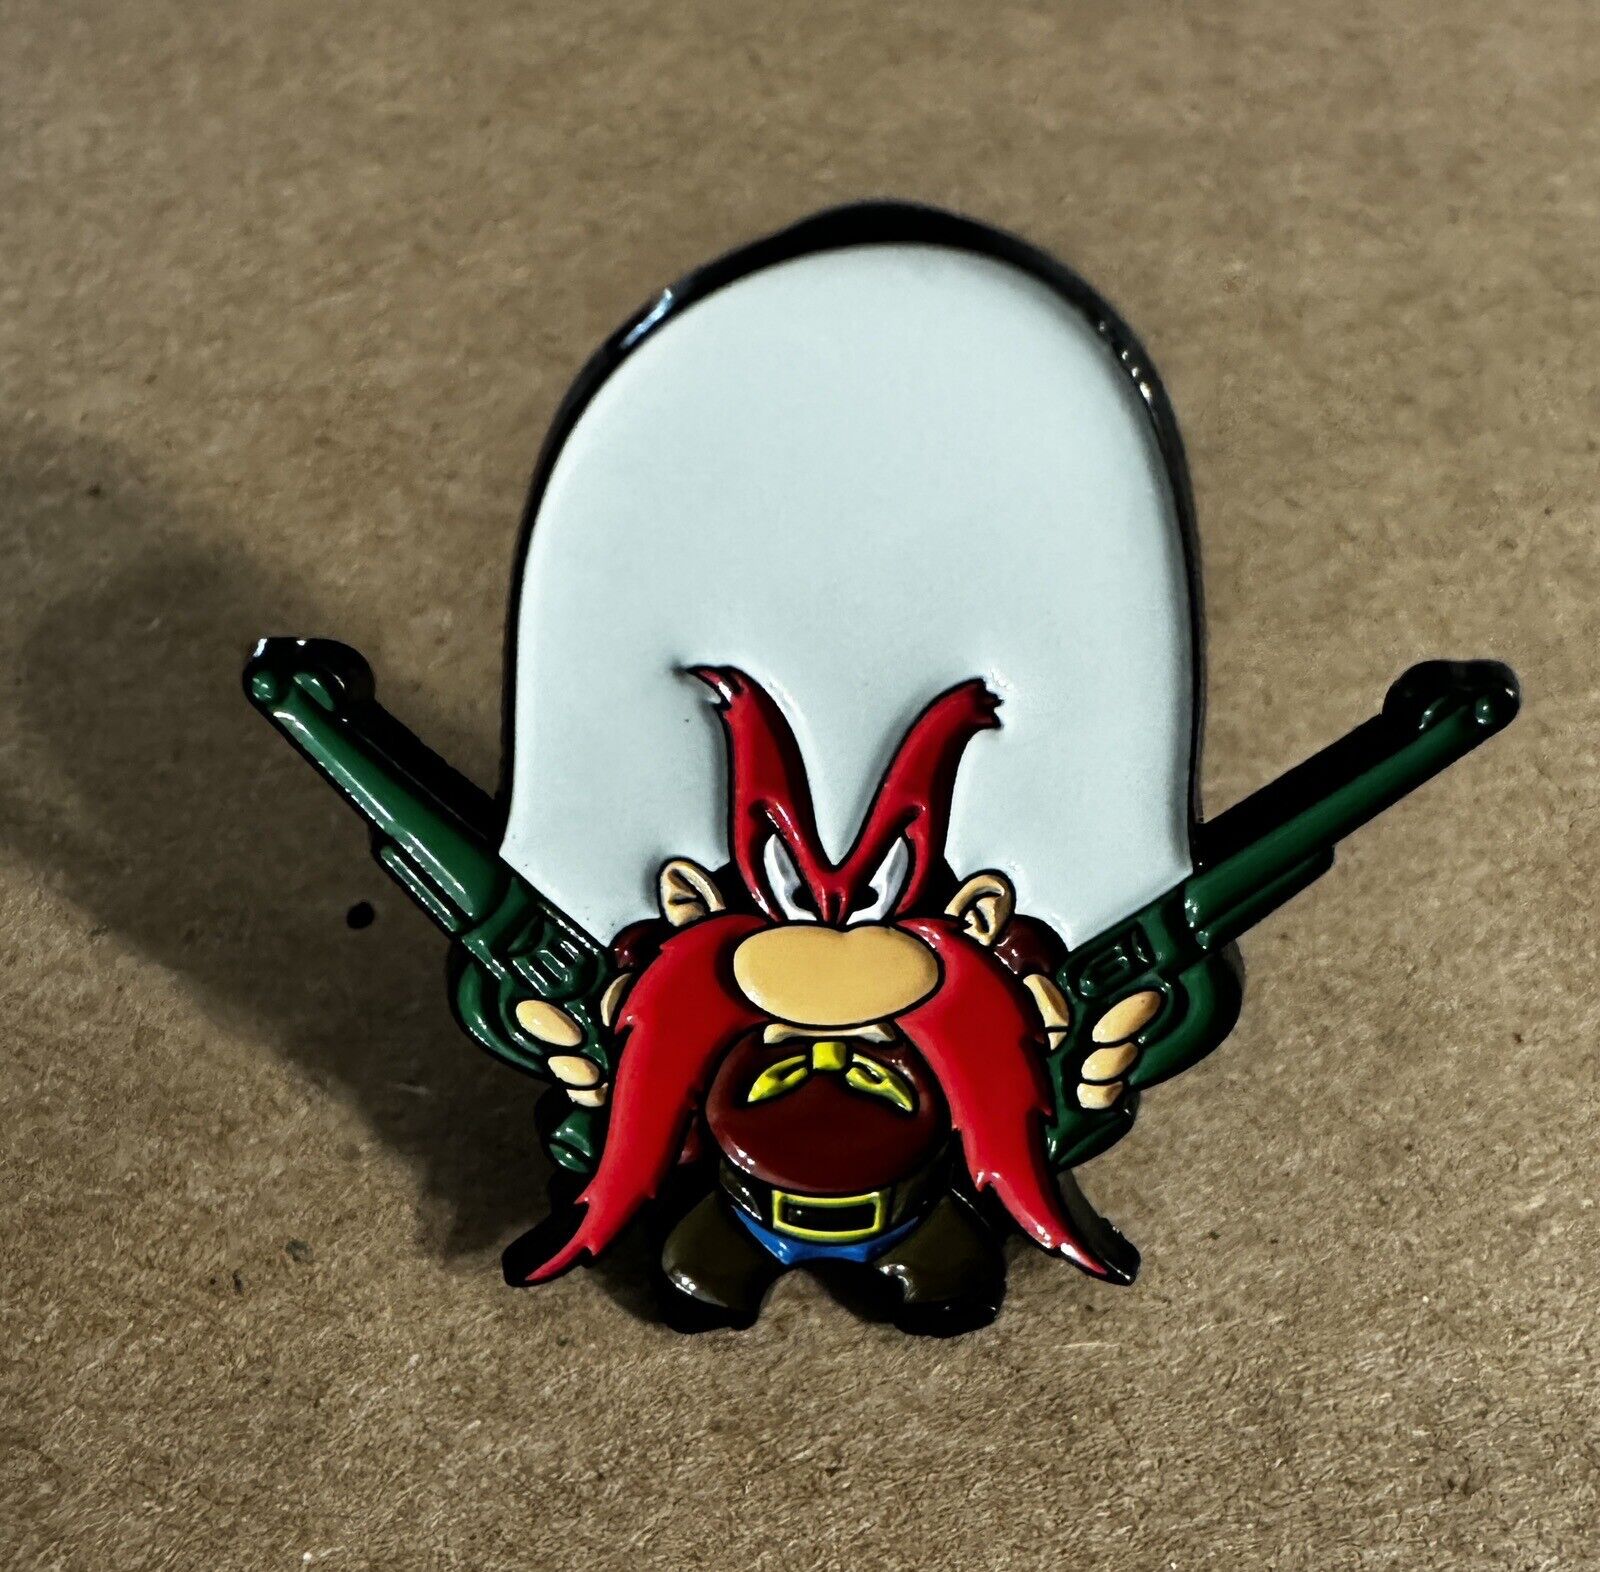 Yosemite Sam Looney Tunes Lapel Pin For Hats , Shirts , Vests Or A Gift